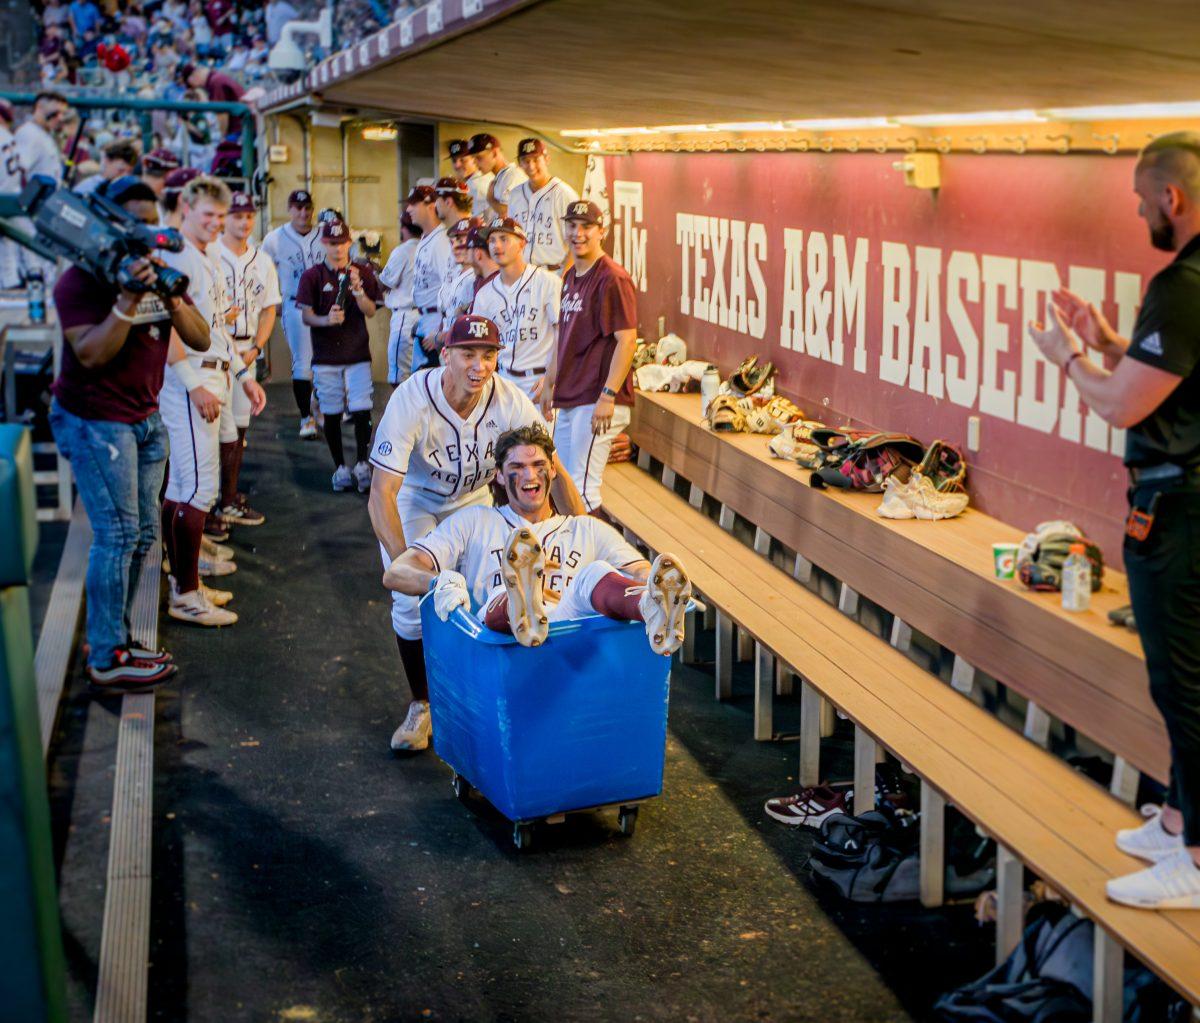 Freshman OF Jace LaViolette (17) gets pushed in a cart after a home run during the 8th inning during a game vs. Alabama on Friday, May 12, 2023 at Blue Bell Park.